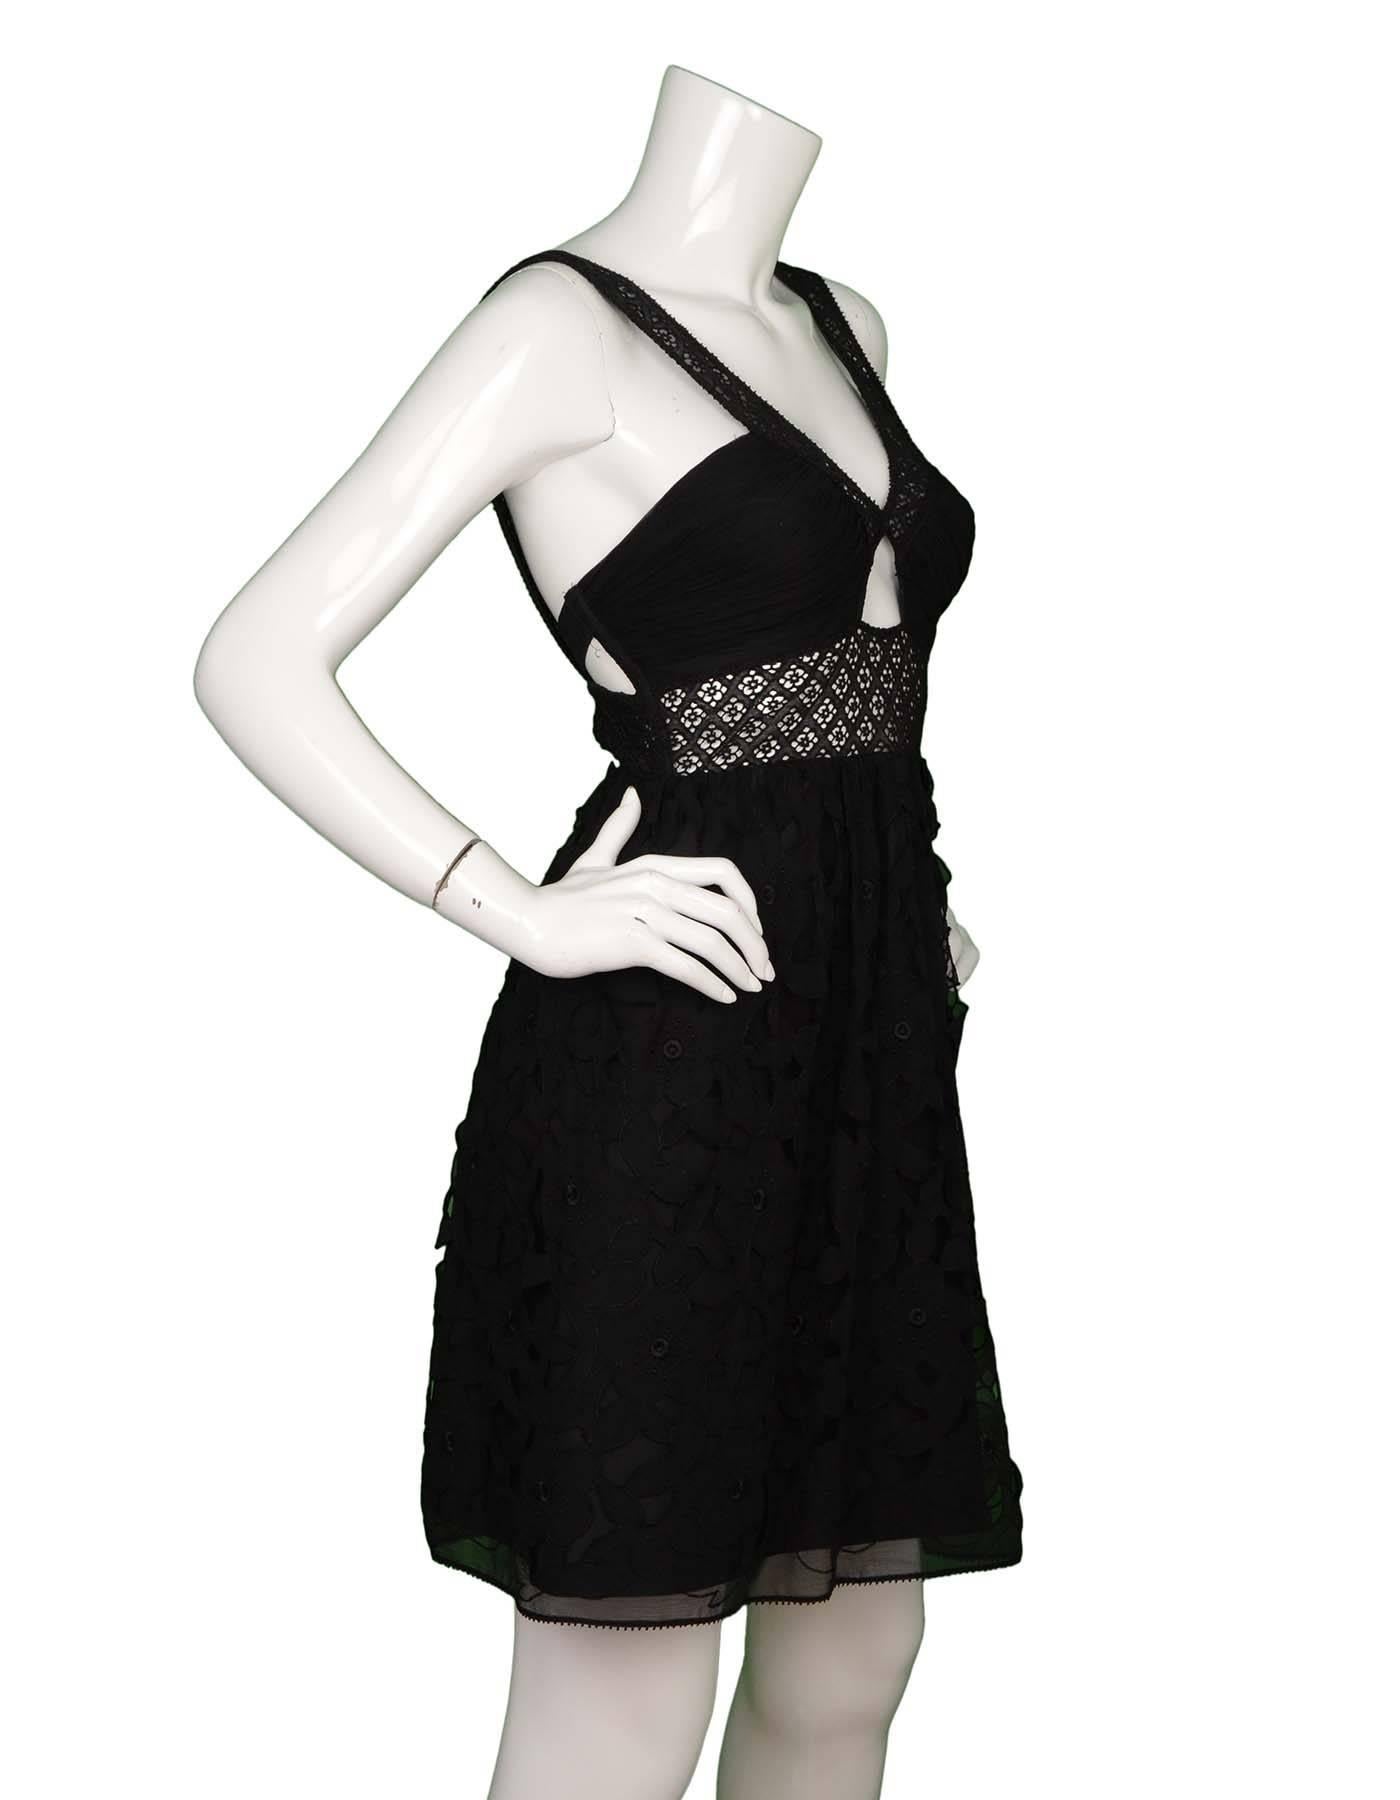 La Perla Silk & Lace Dress sz 44
Features black floral lace overlay and cut out
Made In: Italy
Color: Black
Composition: 41% Silk, 25% acetate, 24% cotton, 10% polyester
Lining: 65% Acetate, 35% rayon
Closure/Opening: Back button closure with